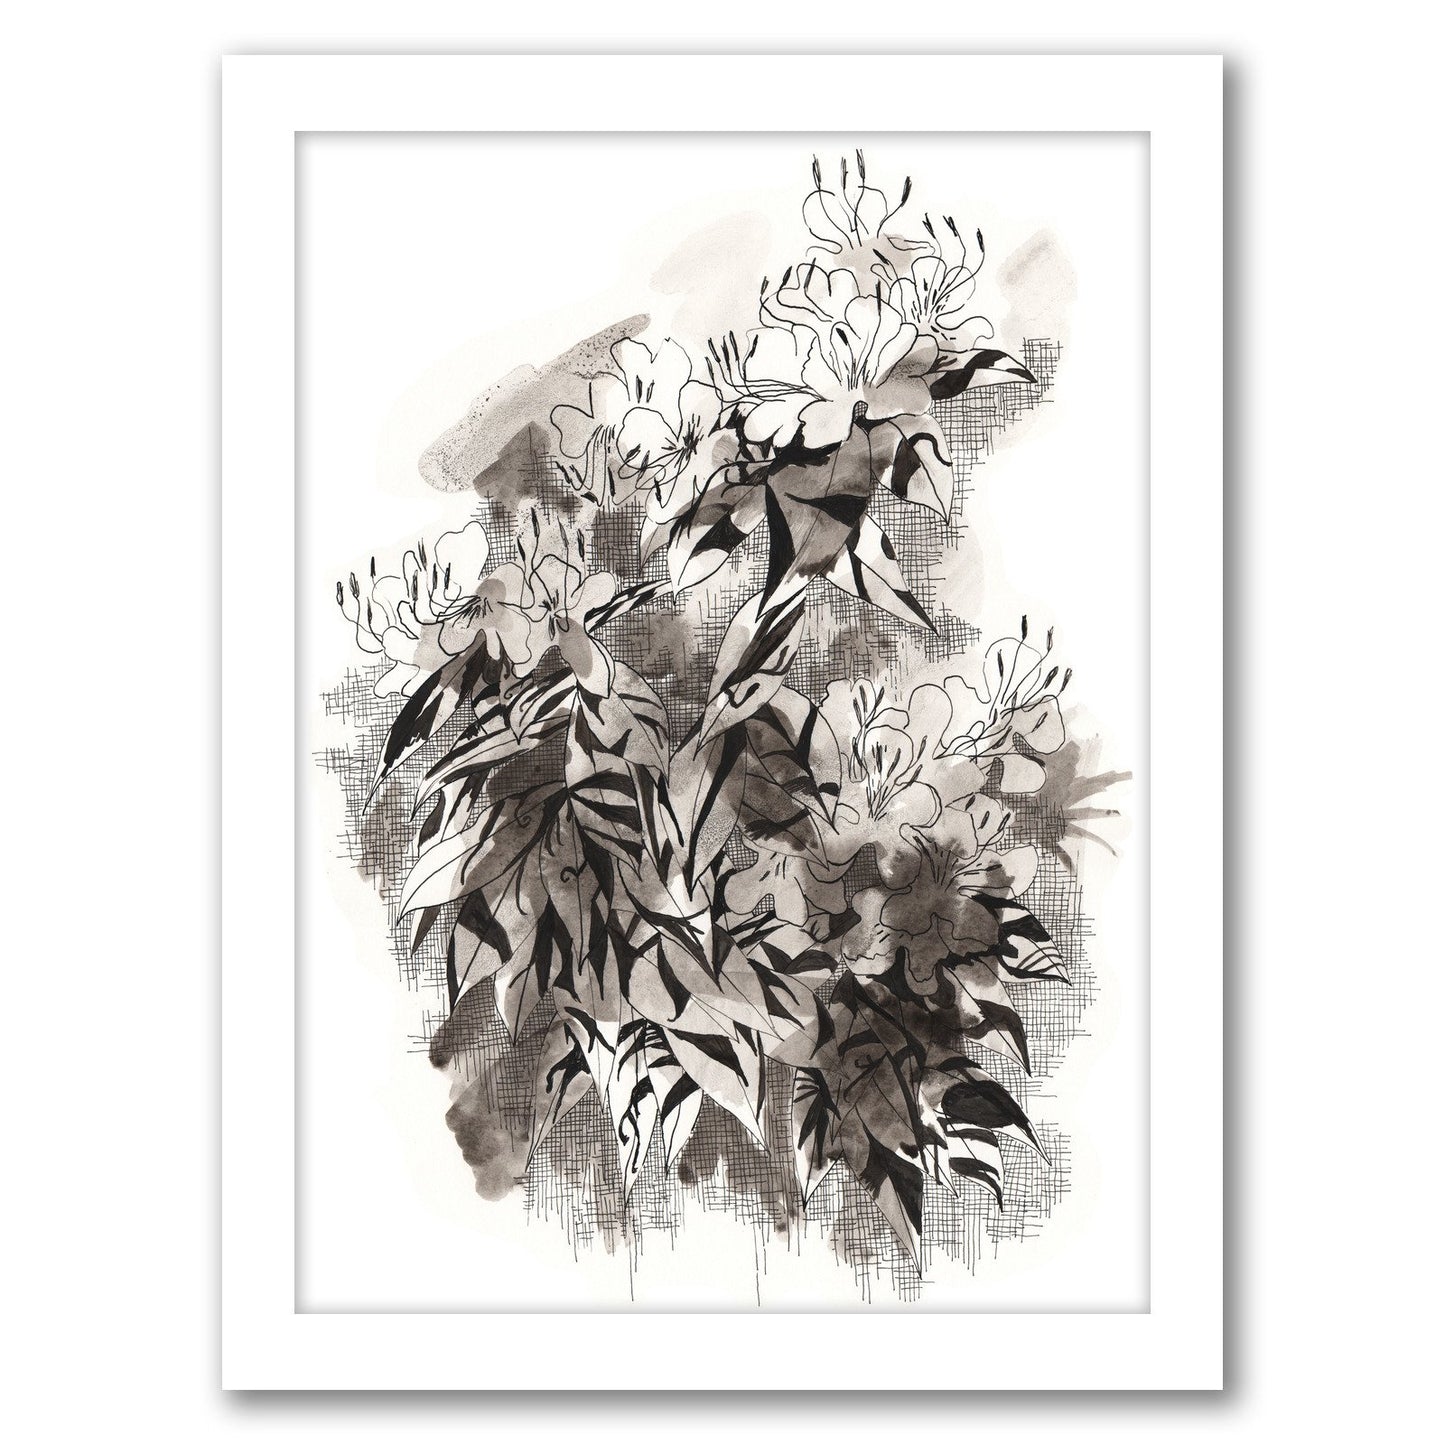 City Garden by Dreamy Me - Framed Print - Americanflat